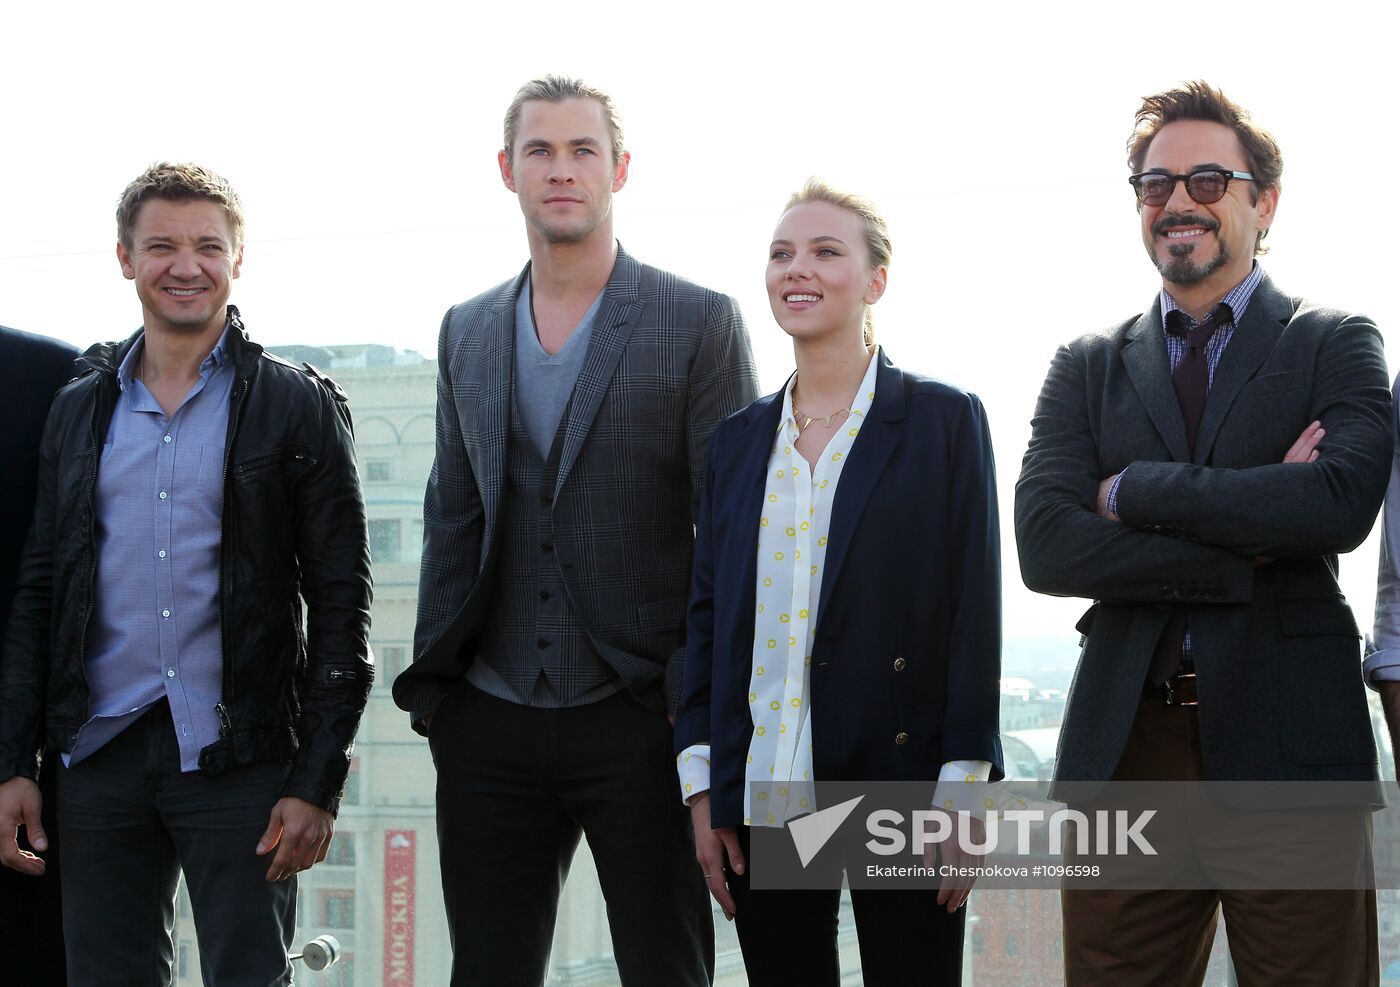 Photocall in Moscow with The Avengers film actors